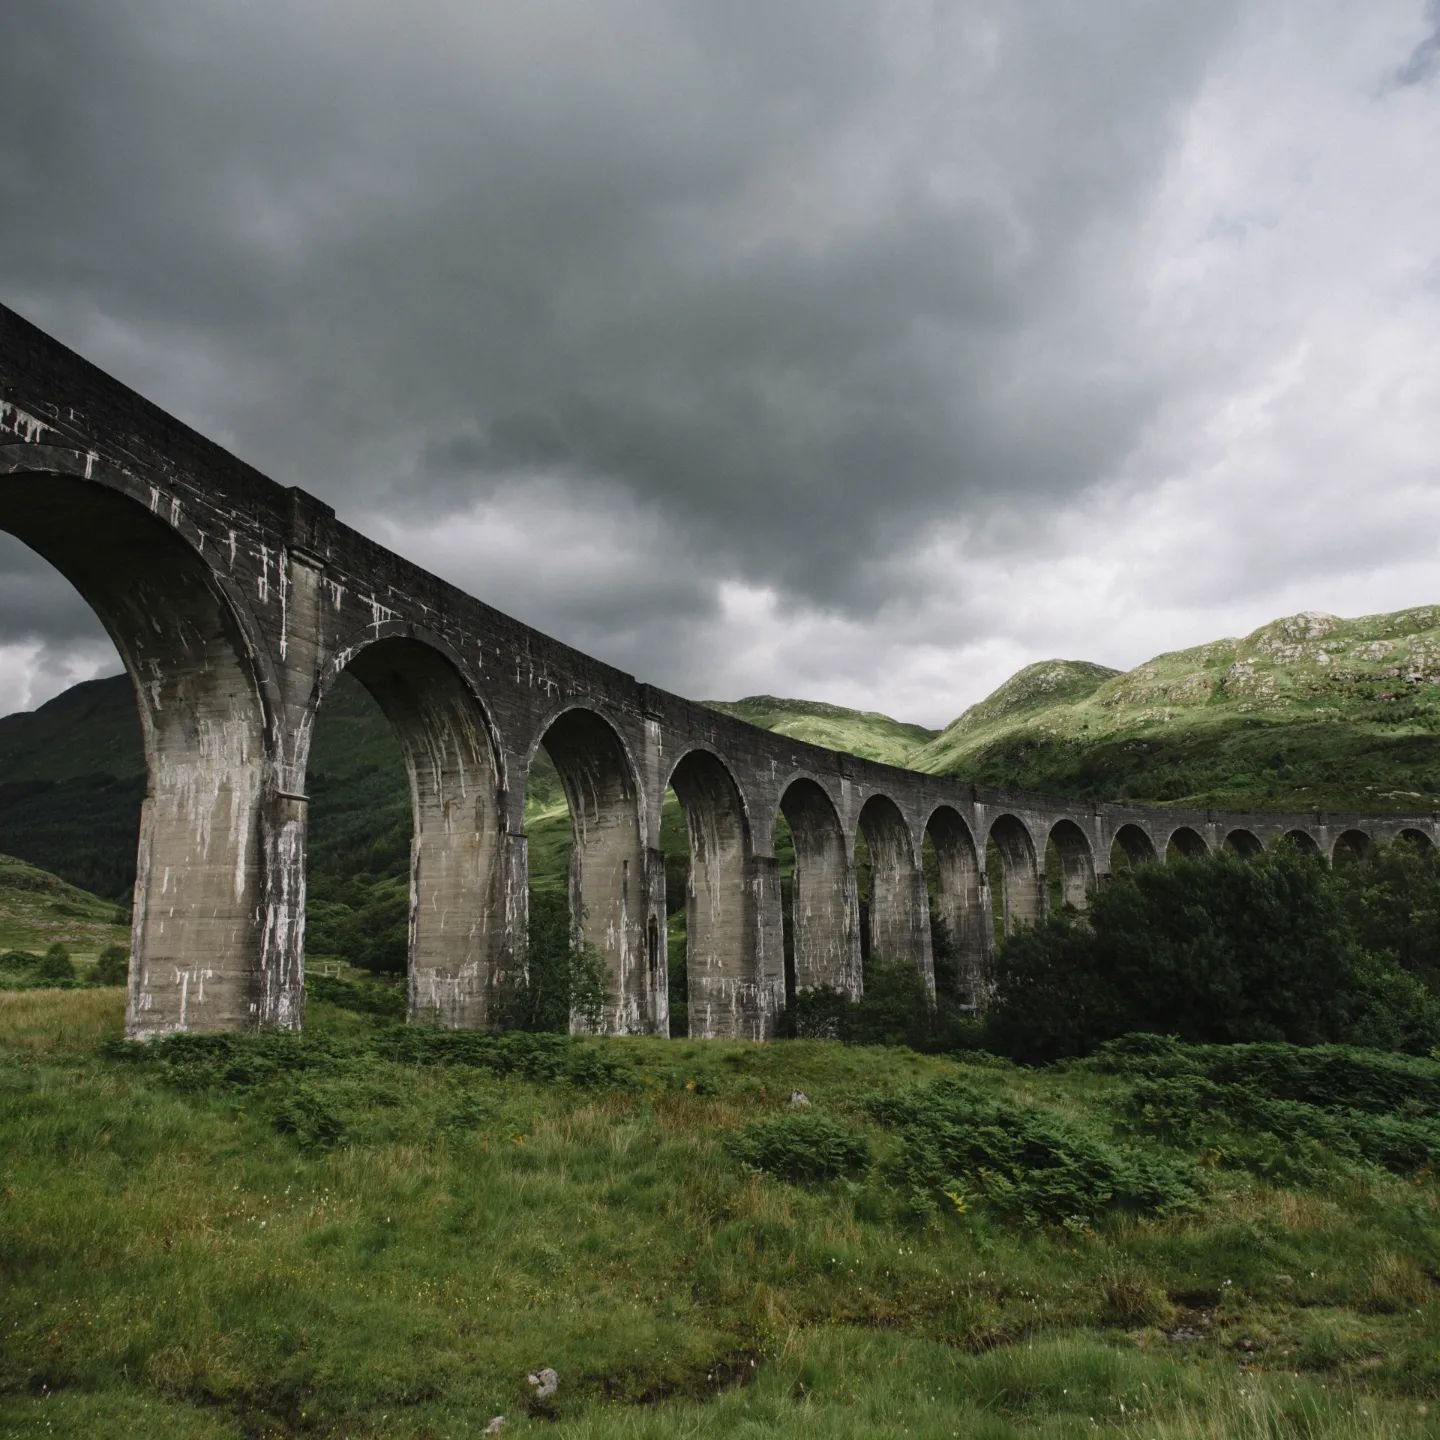 Beautiful Glenfinnan Viaduct on a stormy summer's day. The 'Road to the Isles' covers the area from Fort William to Mallaig and is one of the most beautiful areas in Scotland.&nbsp;

Some tips for this area:

🛥️ Take a day trip to one of the Small I